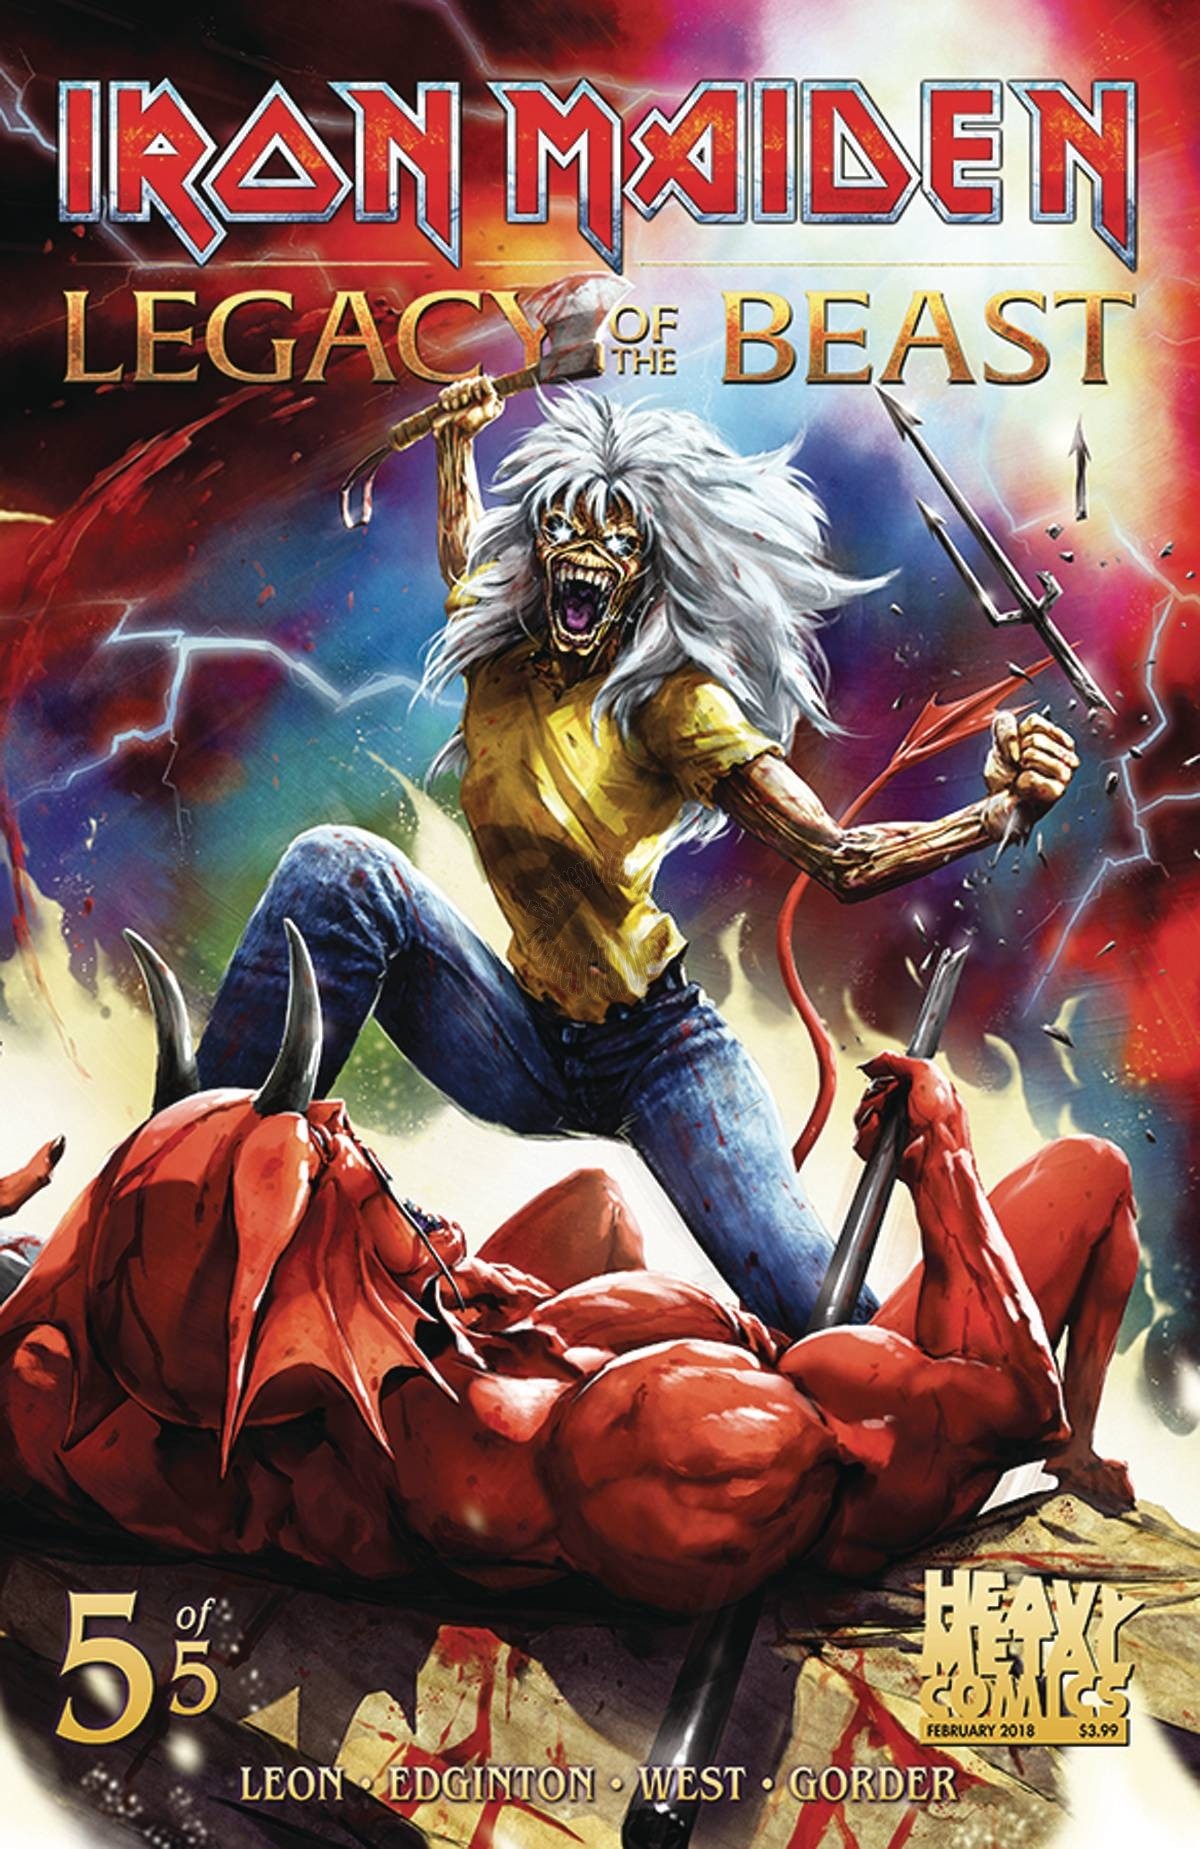 IRON MAIDEN LEGACY OF THE BEAST #5 (OF 5) CVR A CASAS (MR)